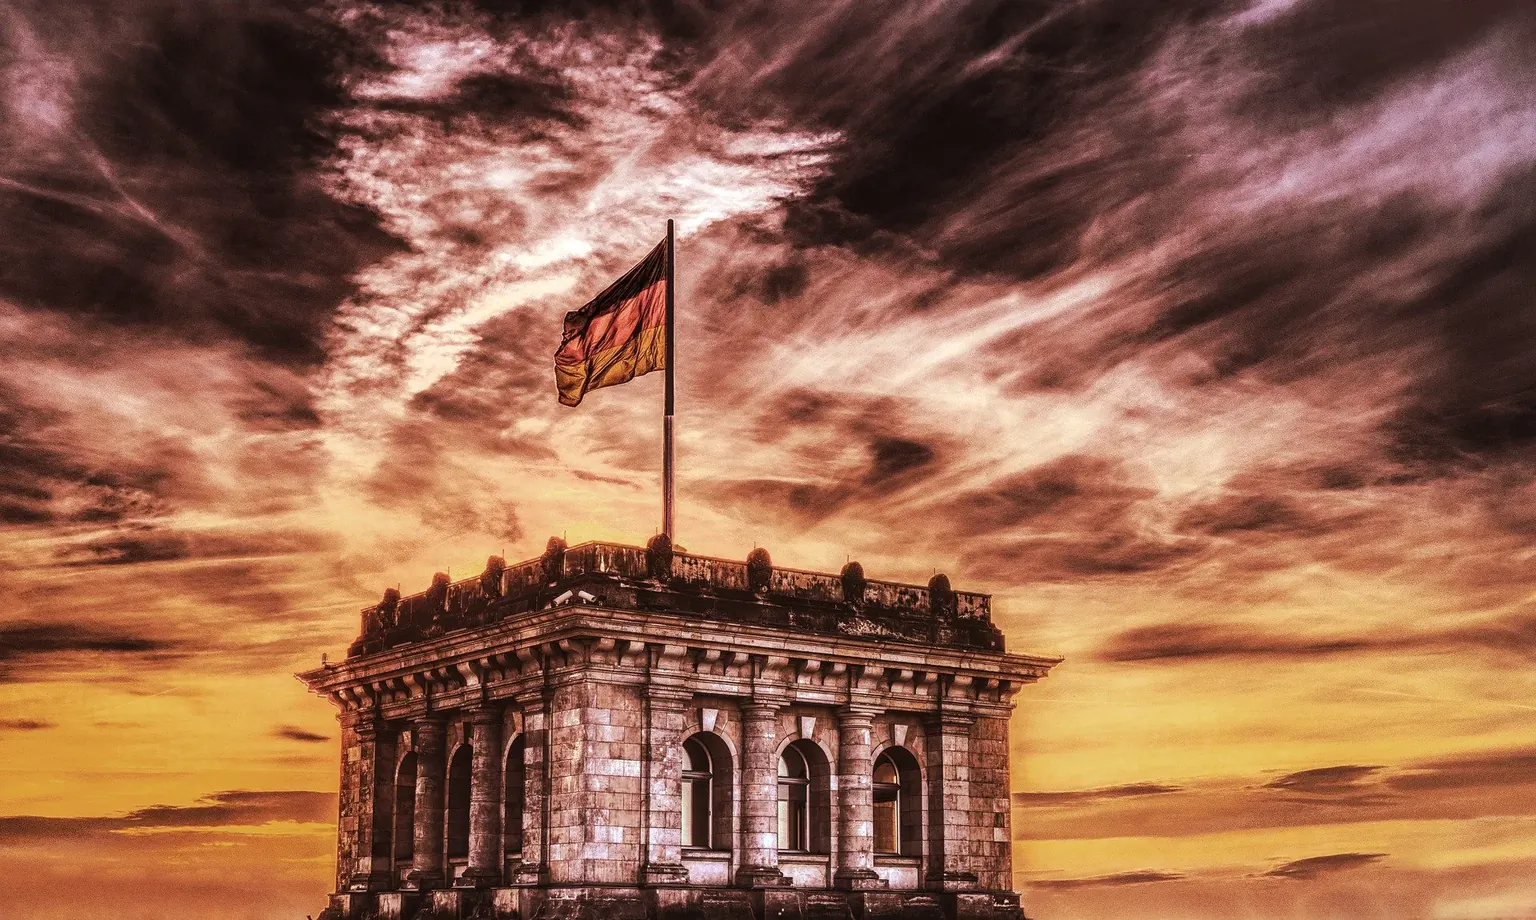 Germany has passed a series of laws to legitimize digital assets. Image: Shutterstock